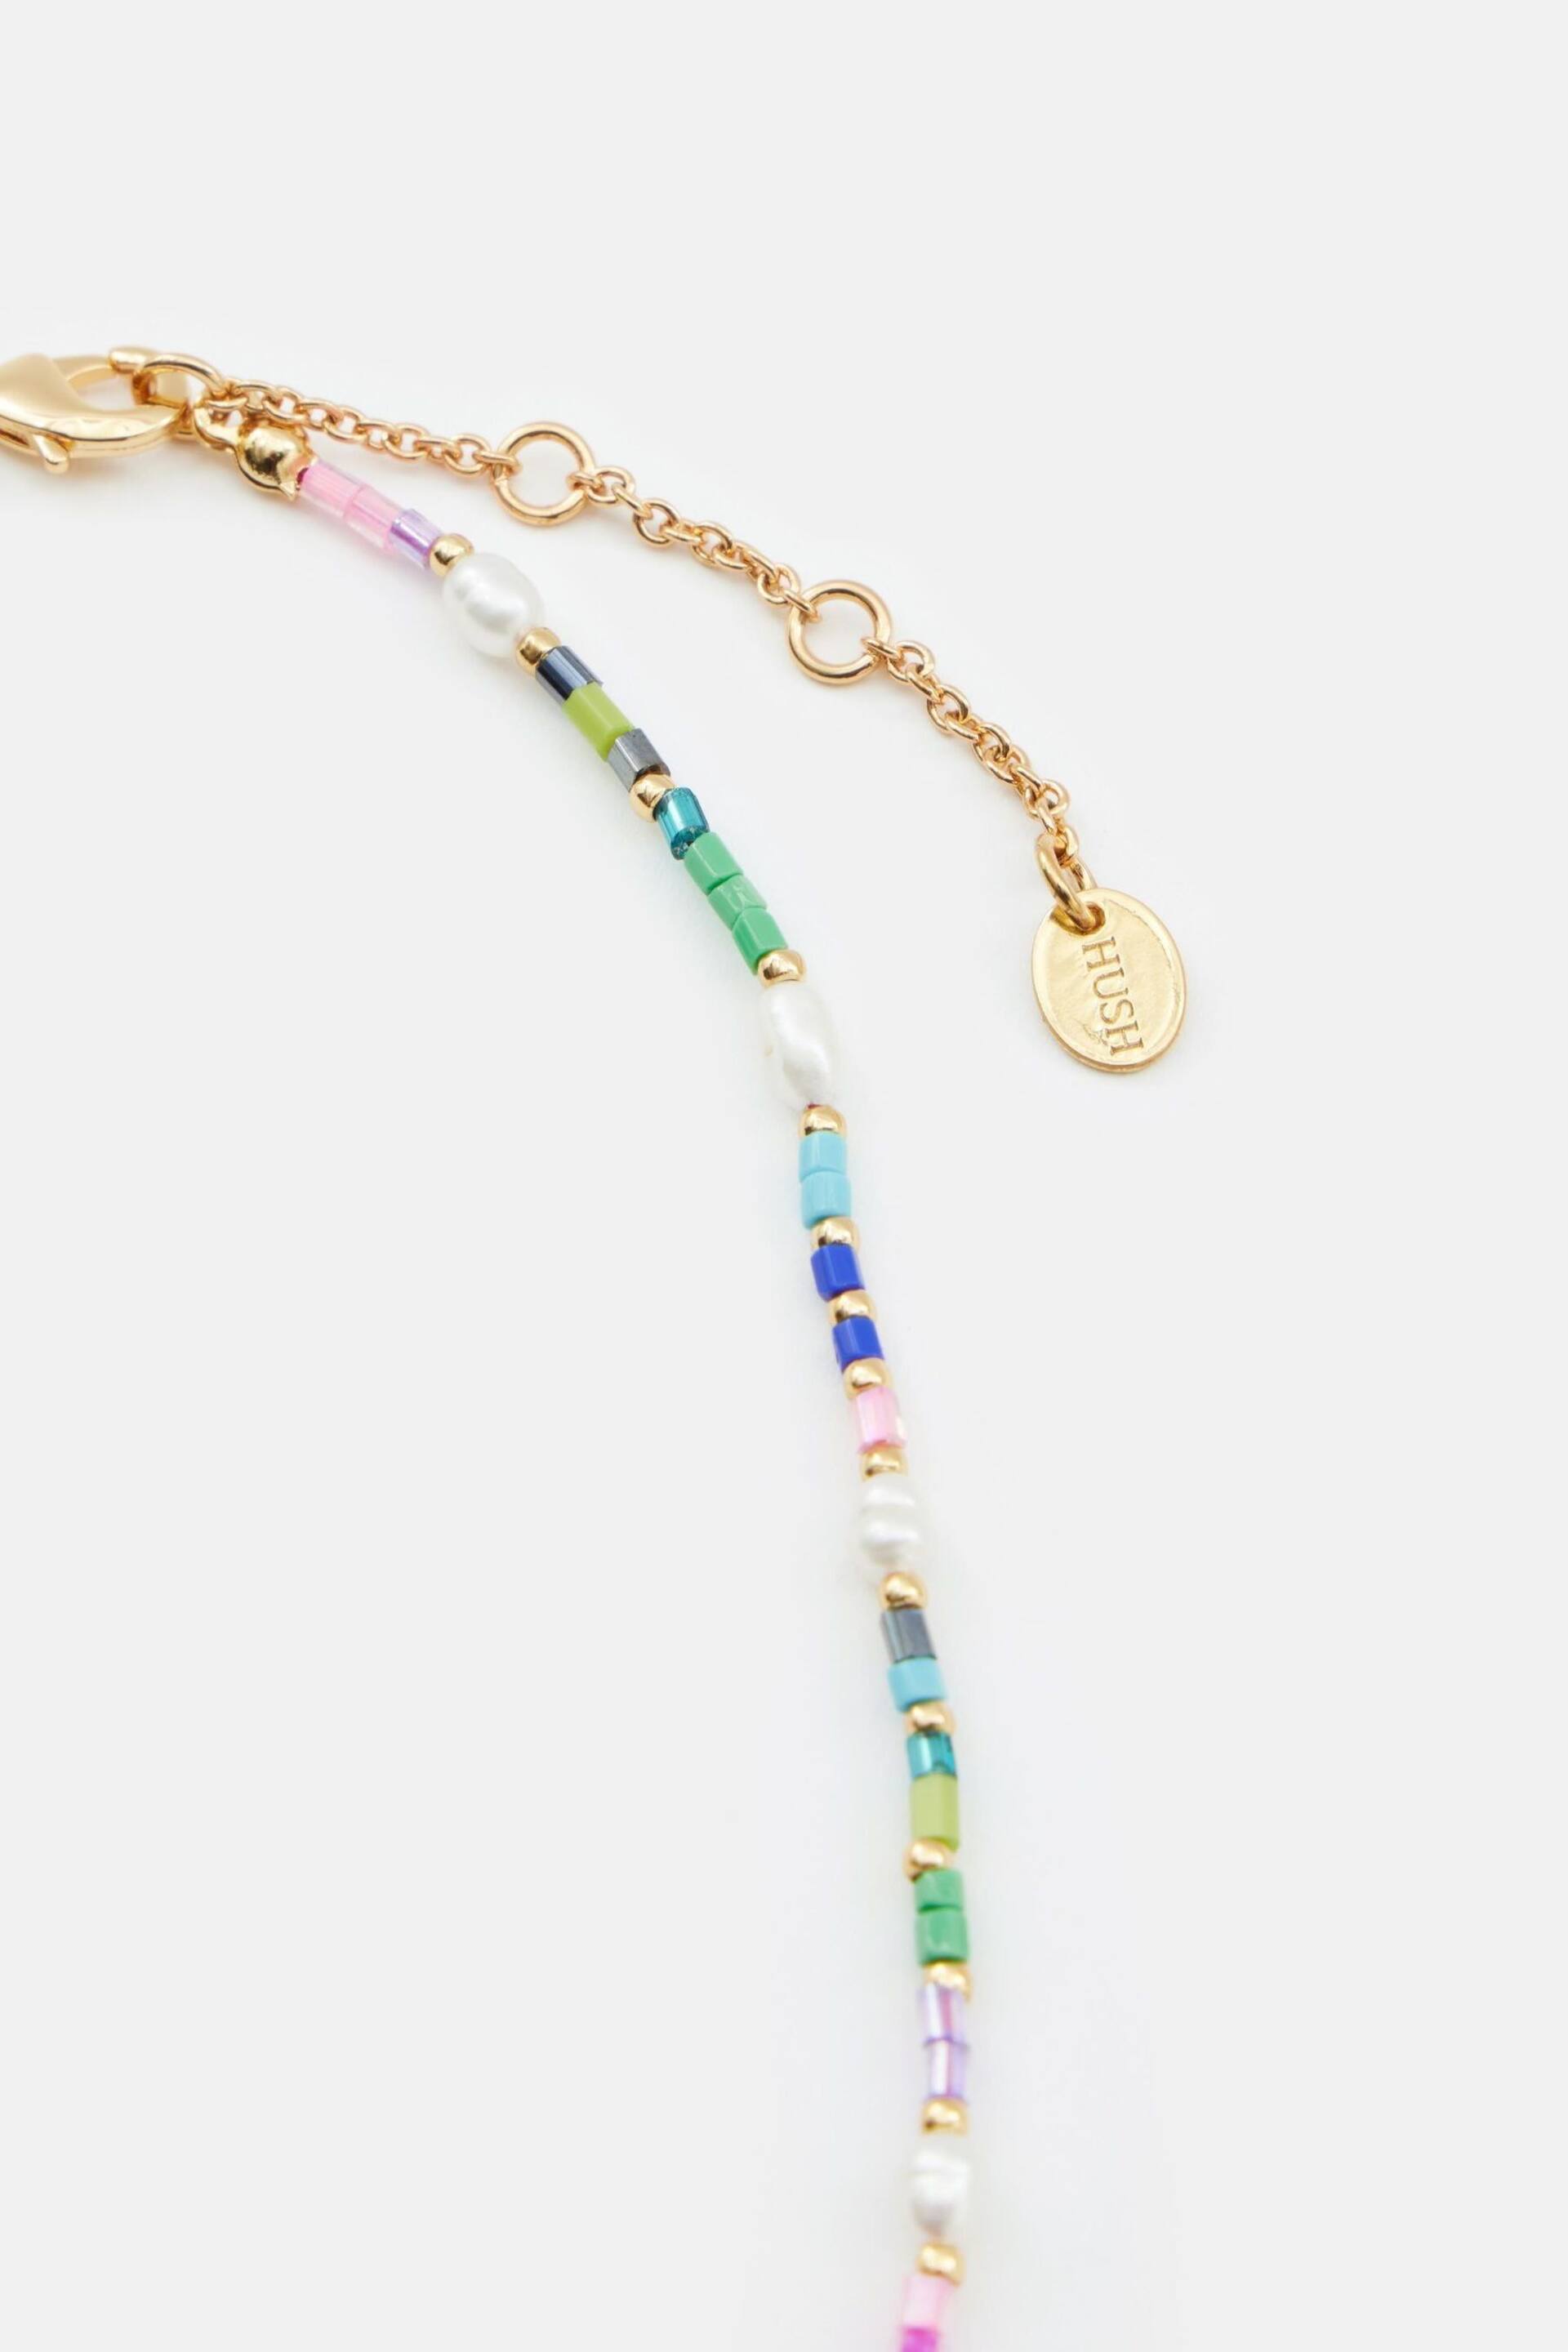 Hush Gold Tone Maura Glass Bead Necklace - Image 2 of 3